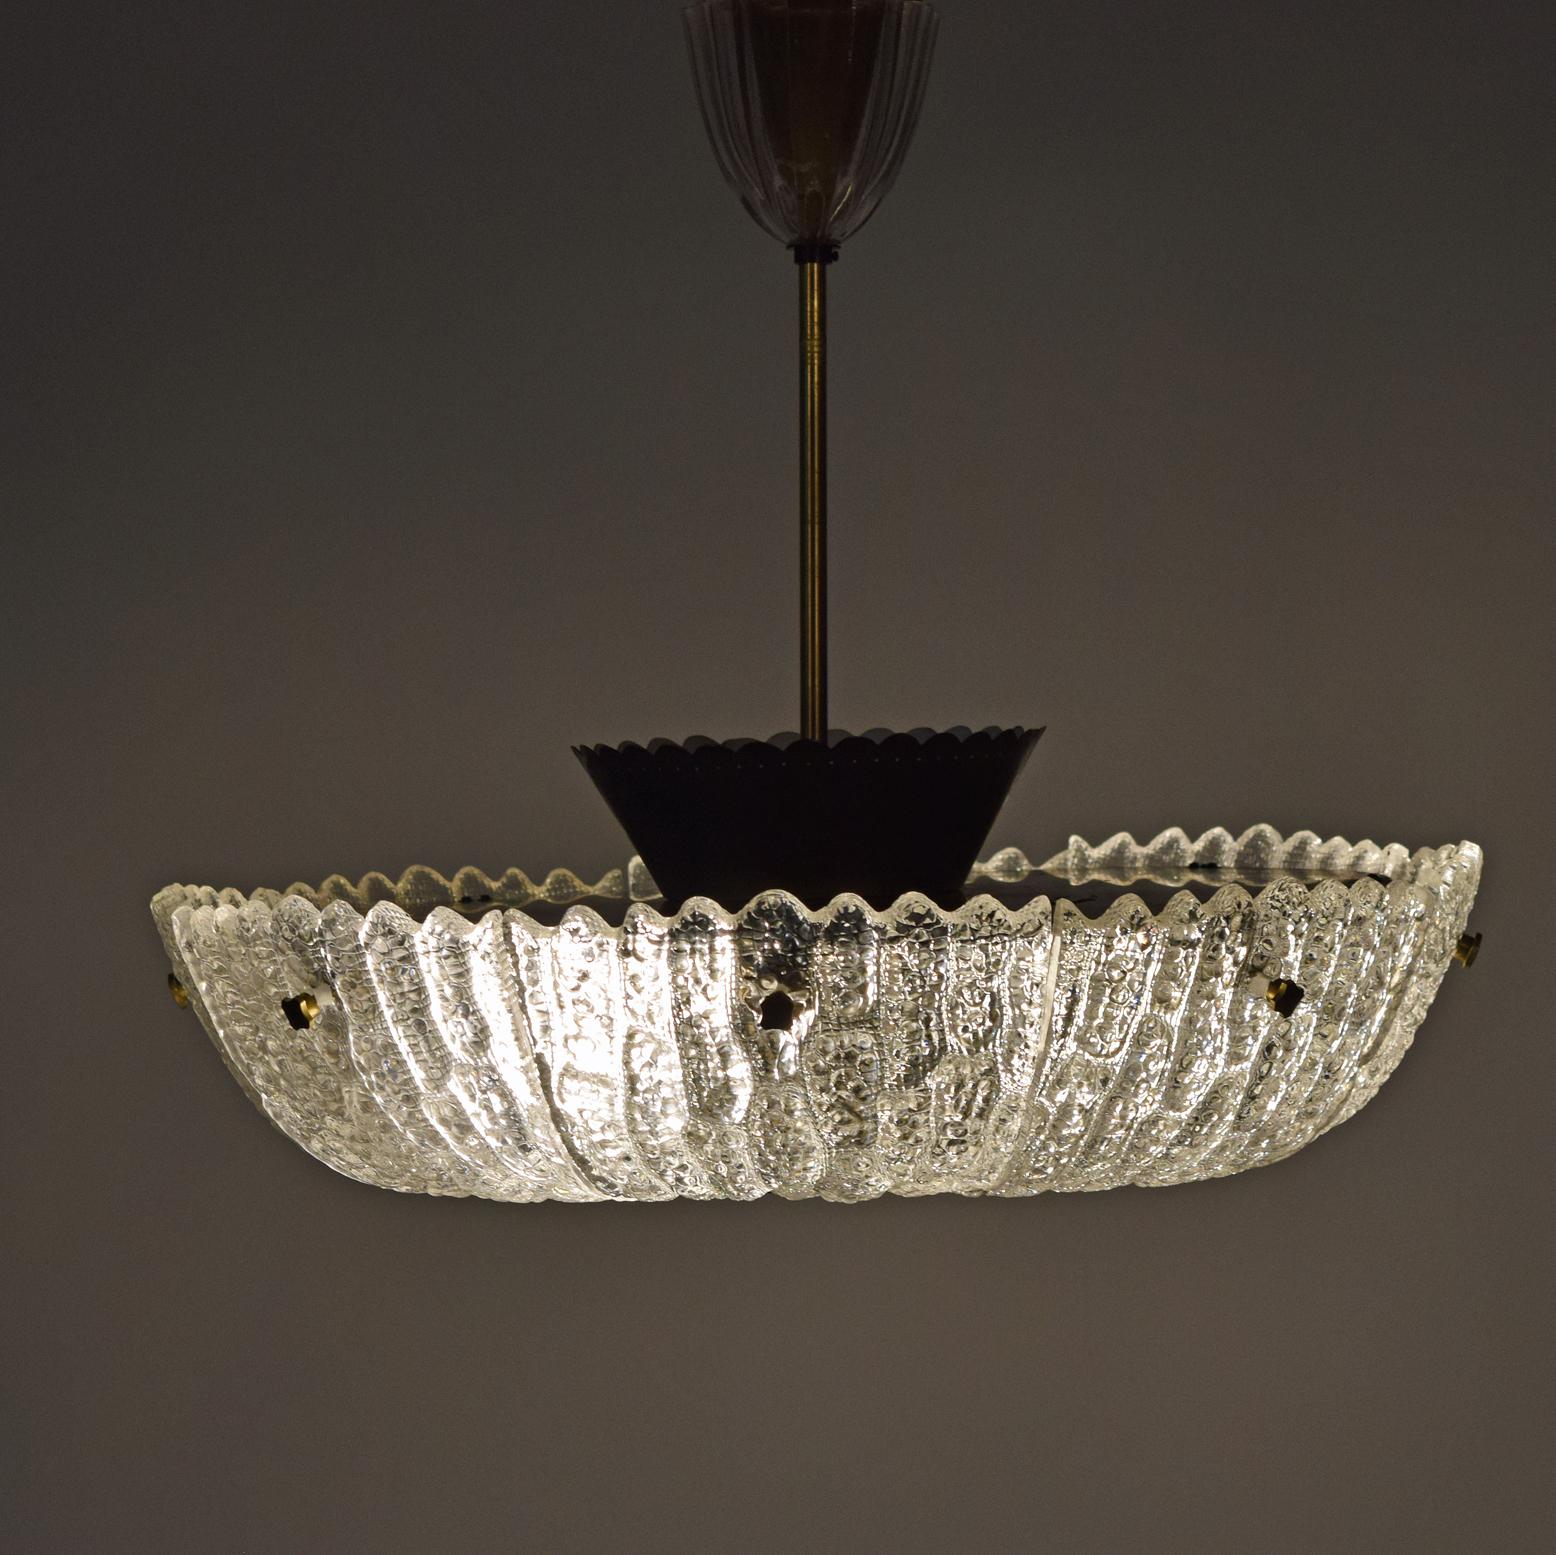 Mold-blown glass Orrefors ceiling lamp, with brass diffuser, rod and decorative screws. Designed by Carl Fagerlund for Orrefors.